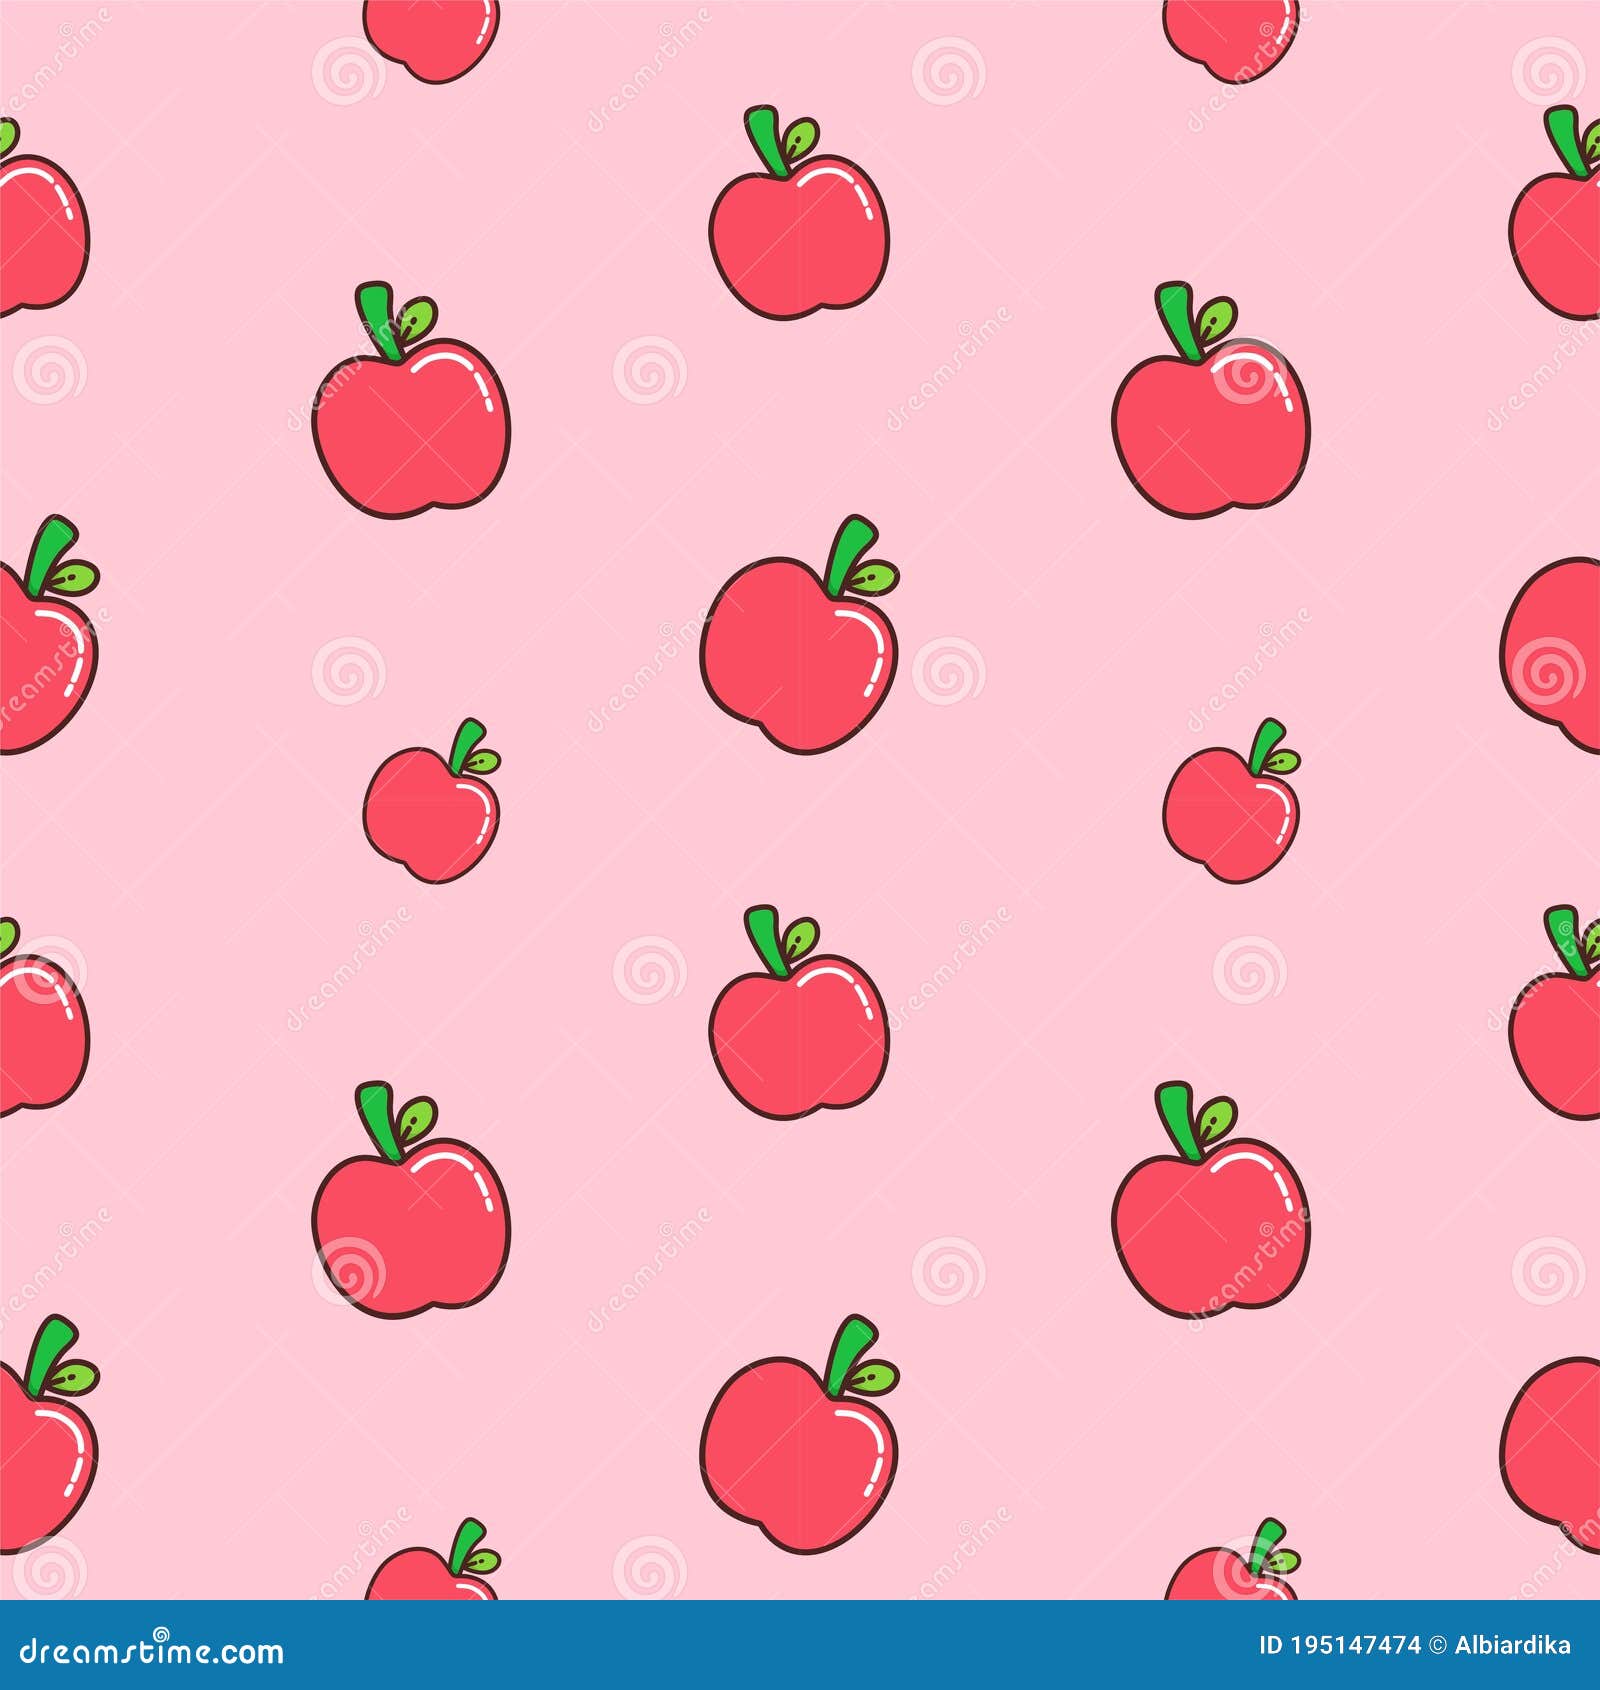 Fresh Sweet Red Apple Fruit Repeat Seamless Pattern Doodle Cartoon Style  Wallpaper Stock Vector - Illustration of apple, background: 195147474